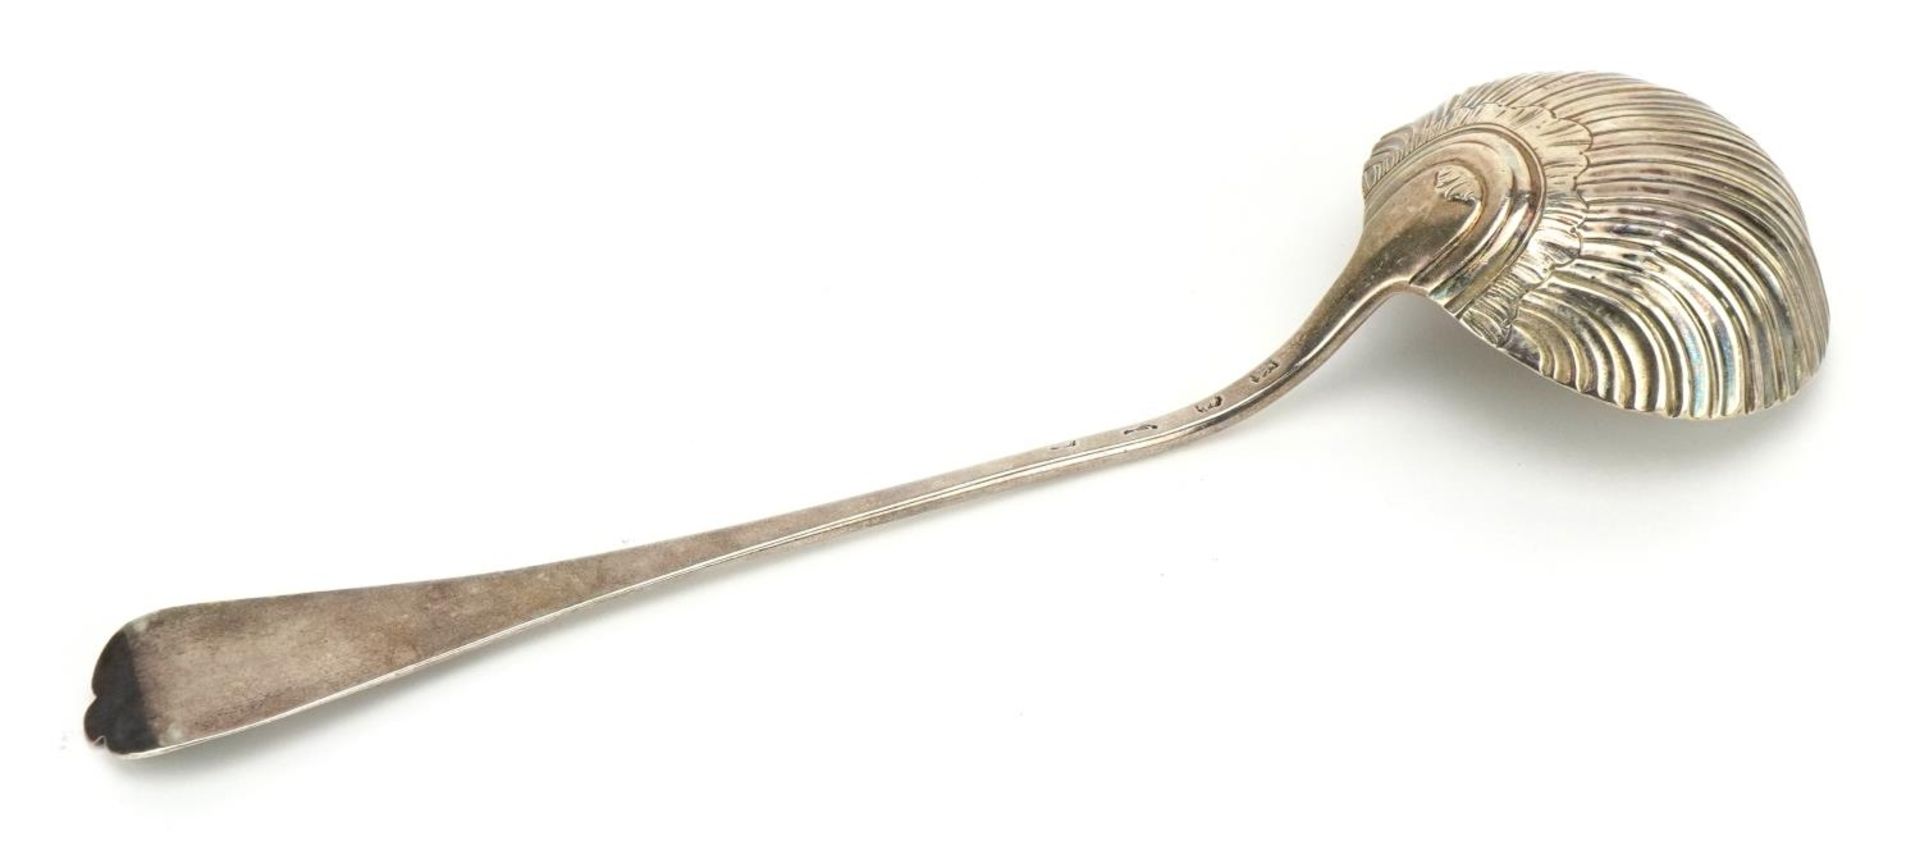 Georgian silver ladle with embossed shell design bowl, indistinct hallmarks, possibly London 1754, - Image 2 of 3